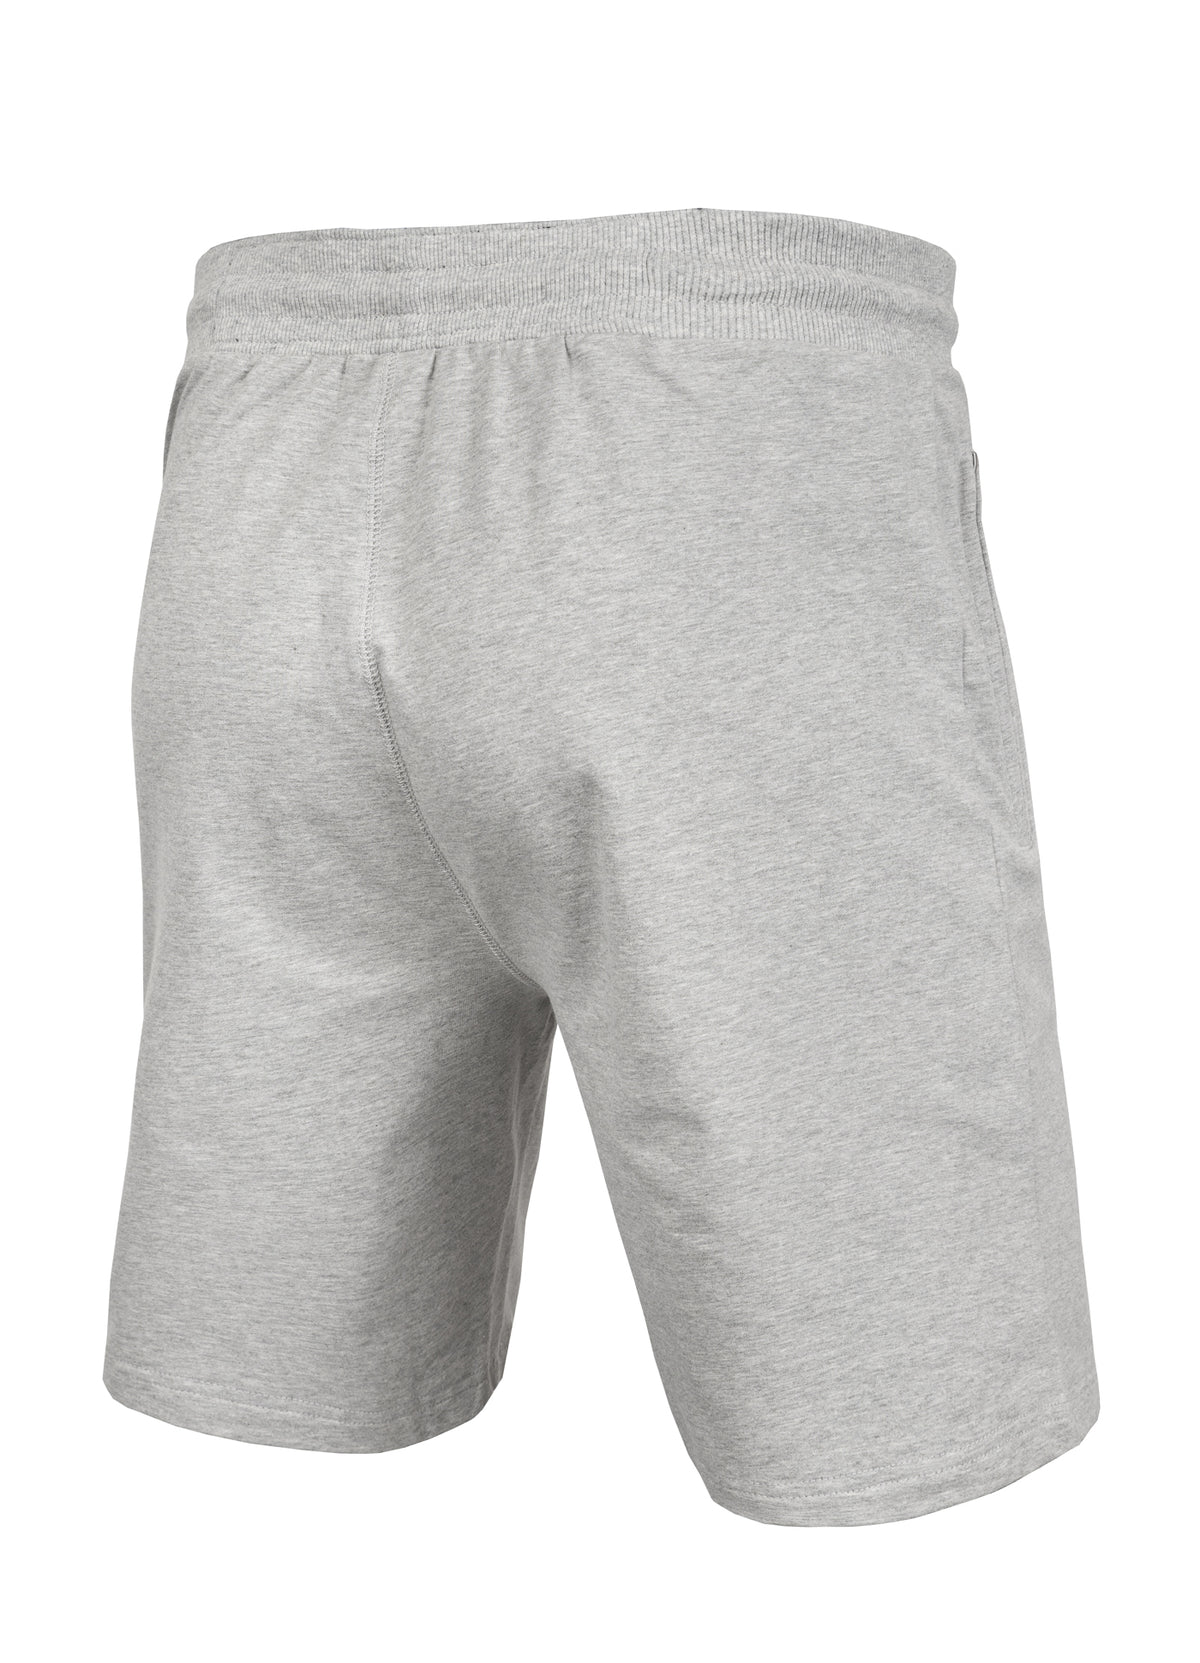 SMALL LOGO FRENCH TERRY 220 Grey Shorts.